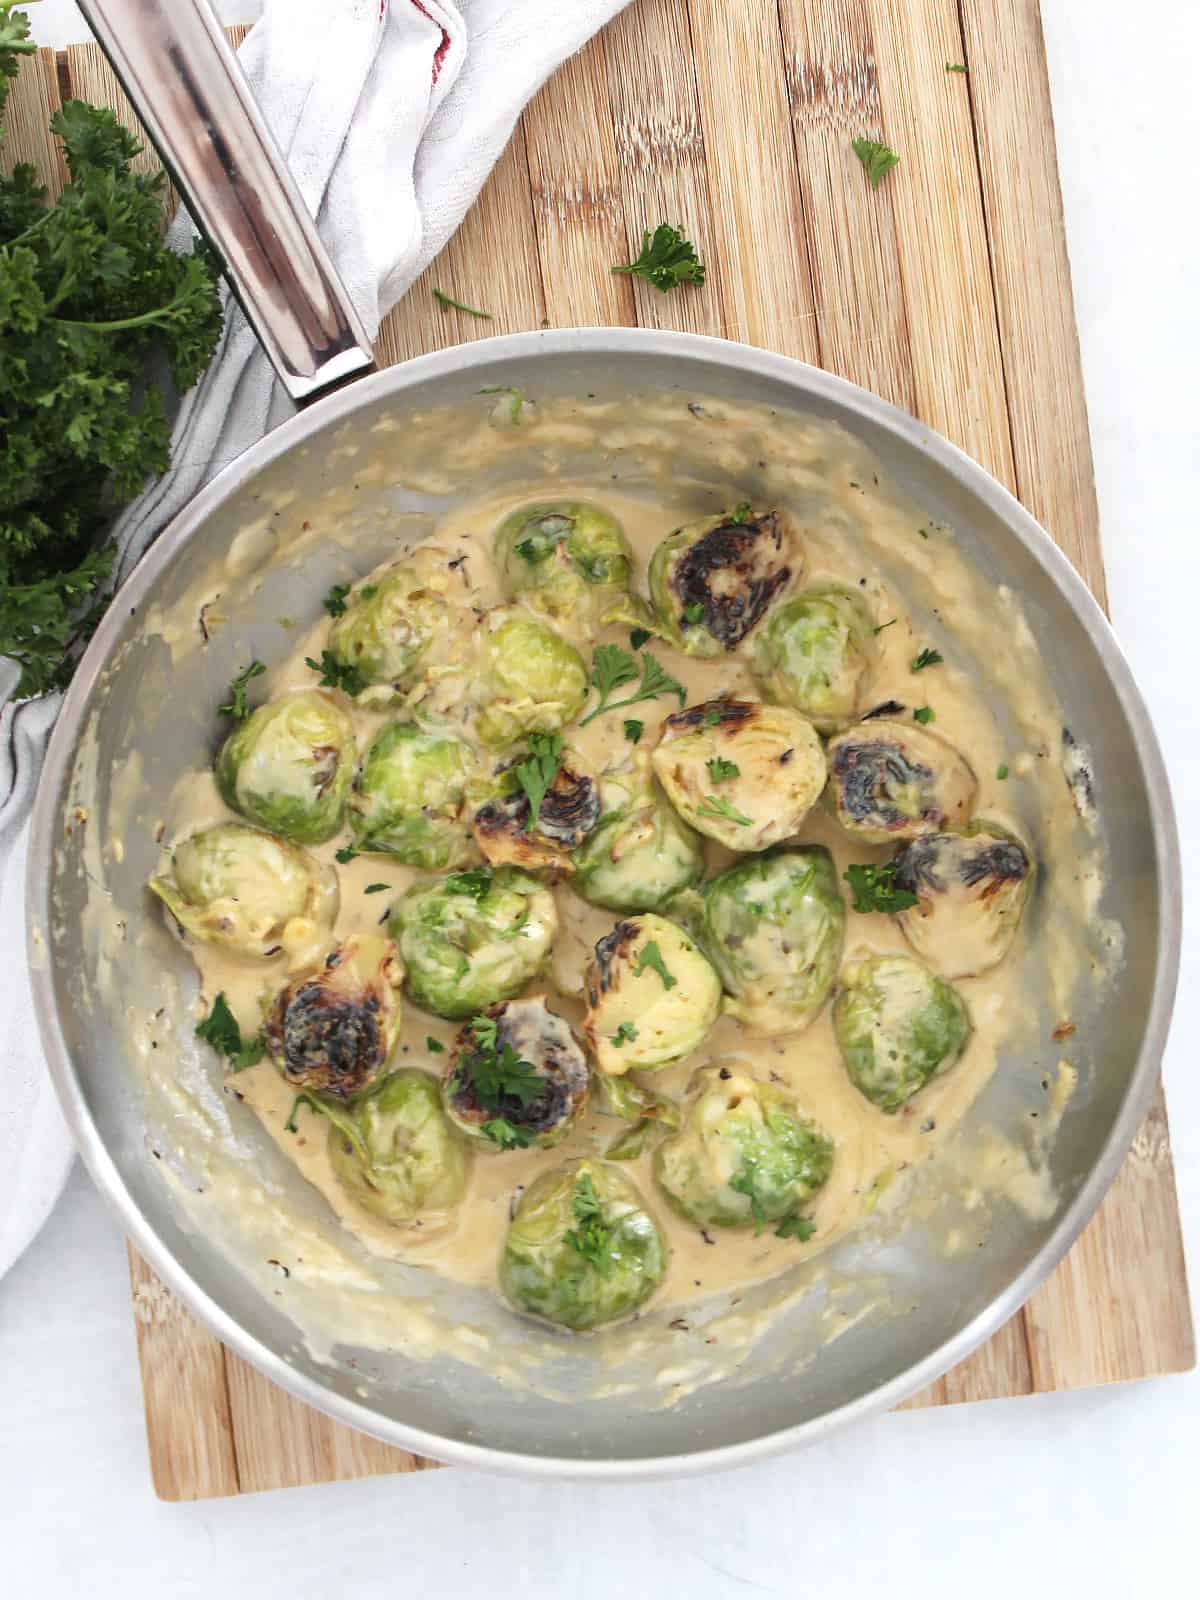 Sautéed Brussels Sprouts in Cream Sauce (Creamed Brussels Sprouts Recipe) - Bite On The Side